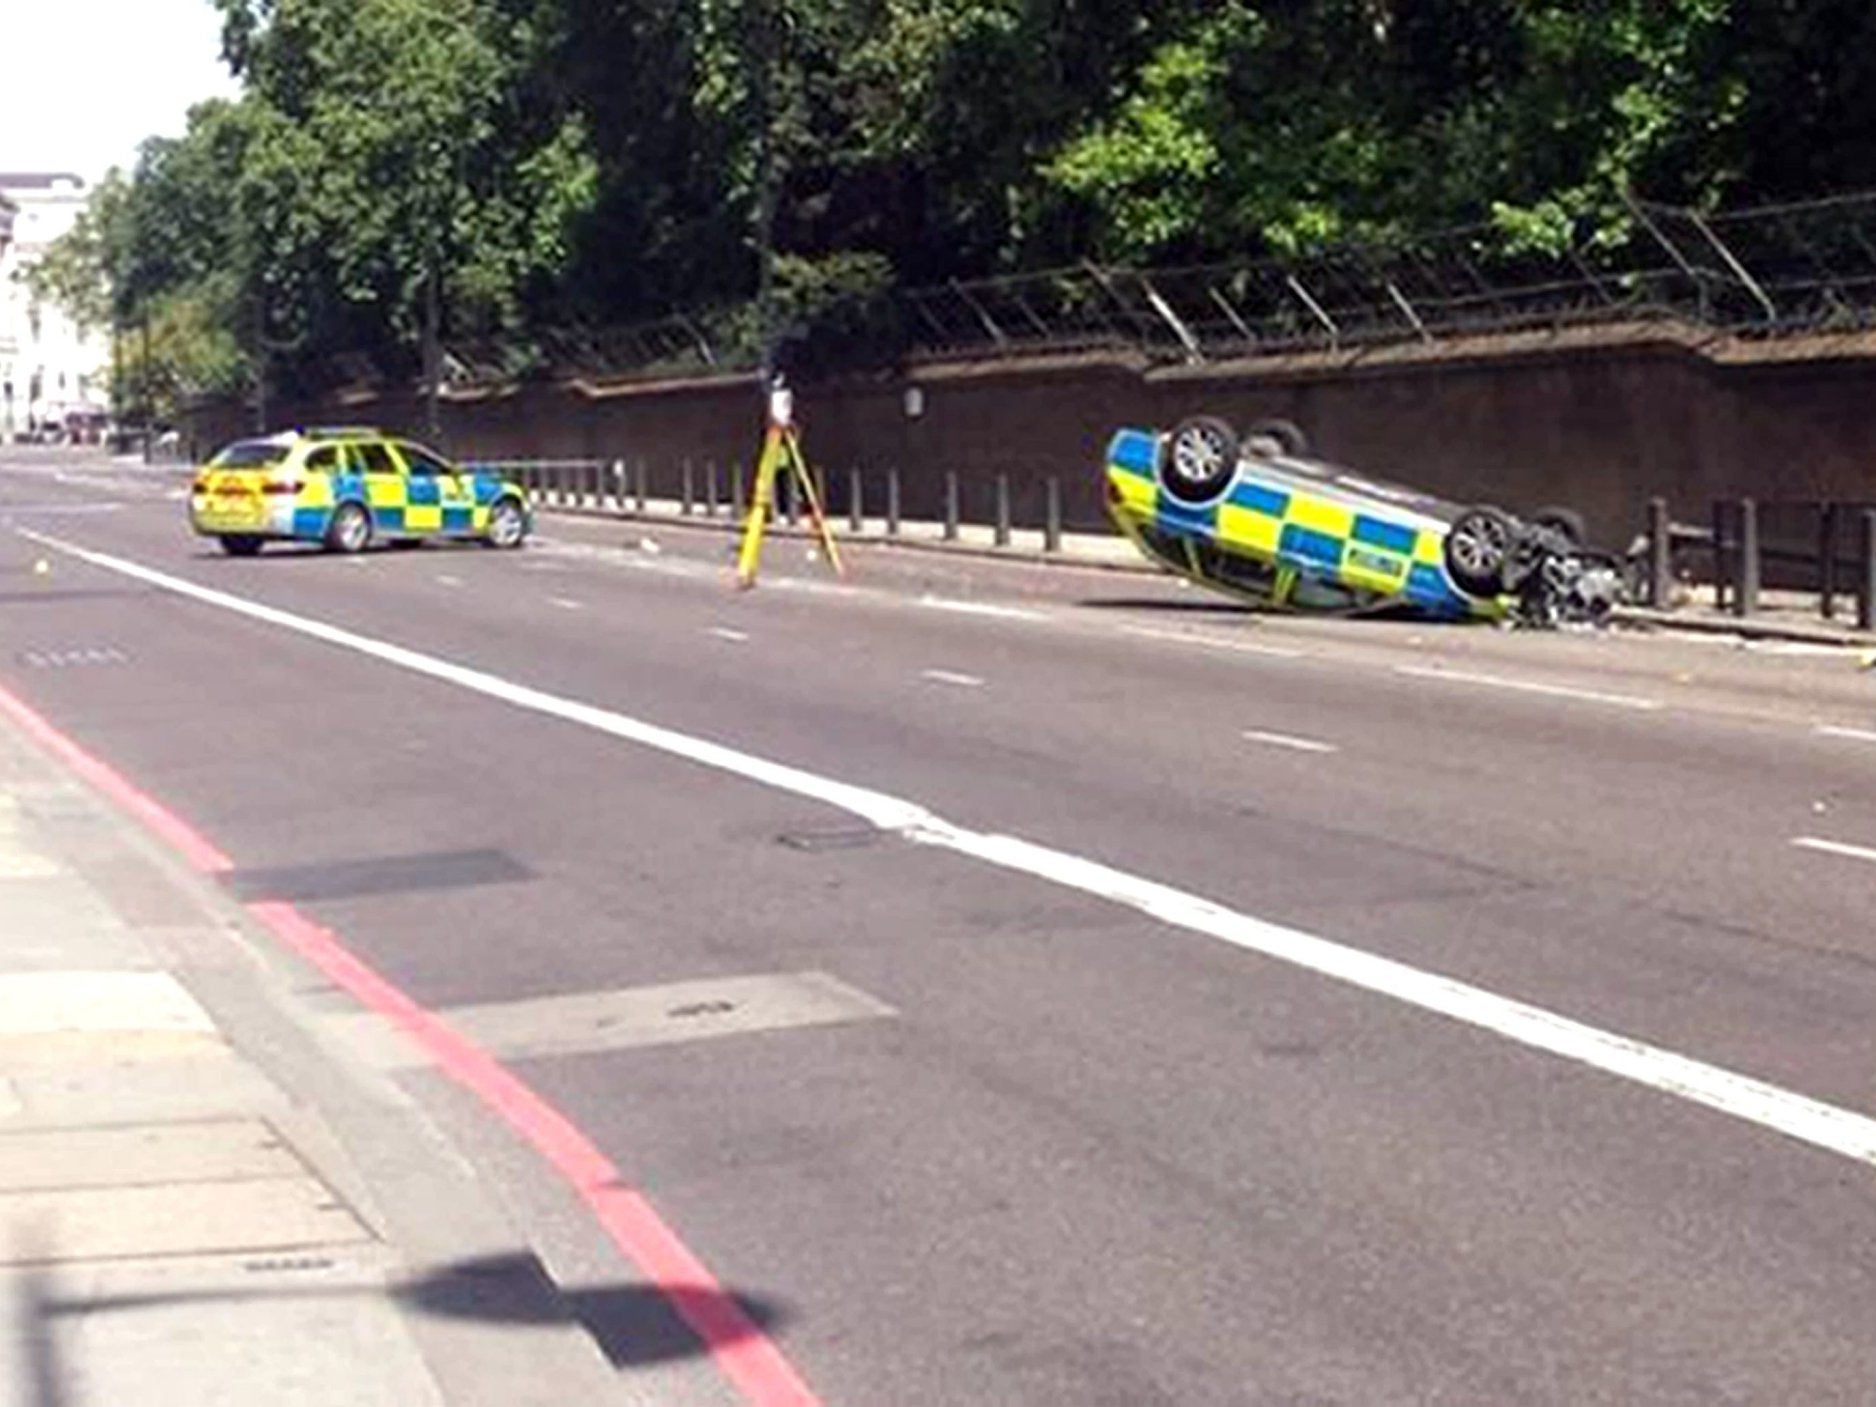 A police car overturned near Buckingham Palace which resulted in a 17-year-old boy being taken to hospital .